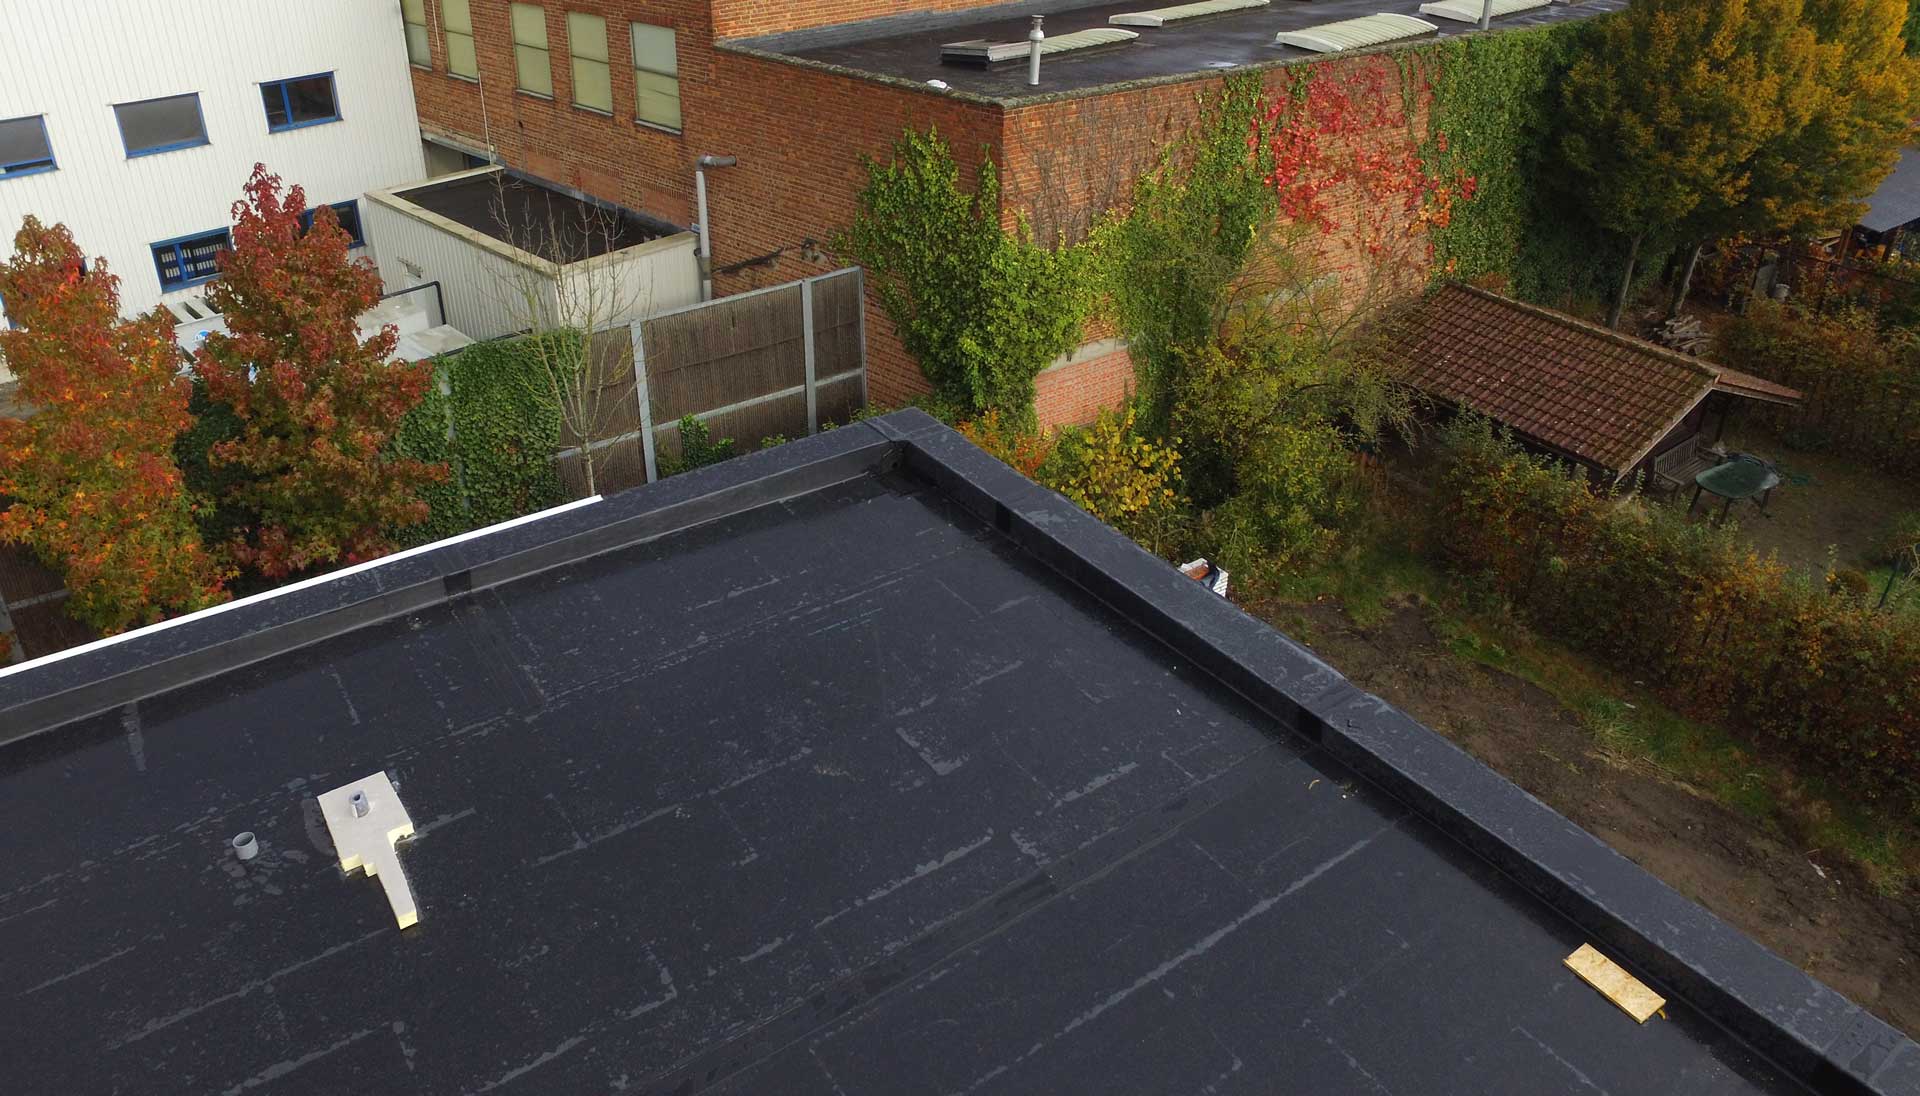 An overview of the top of a black, flat EPDM roof.